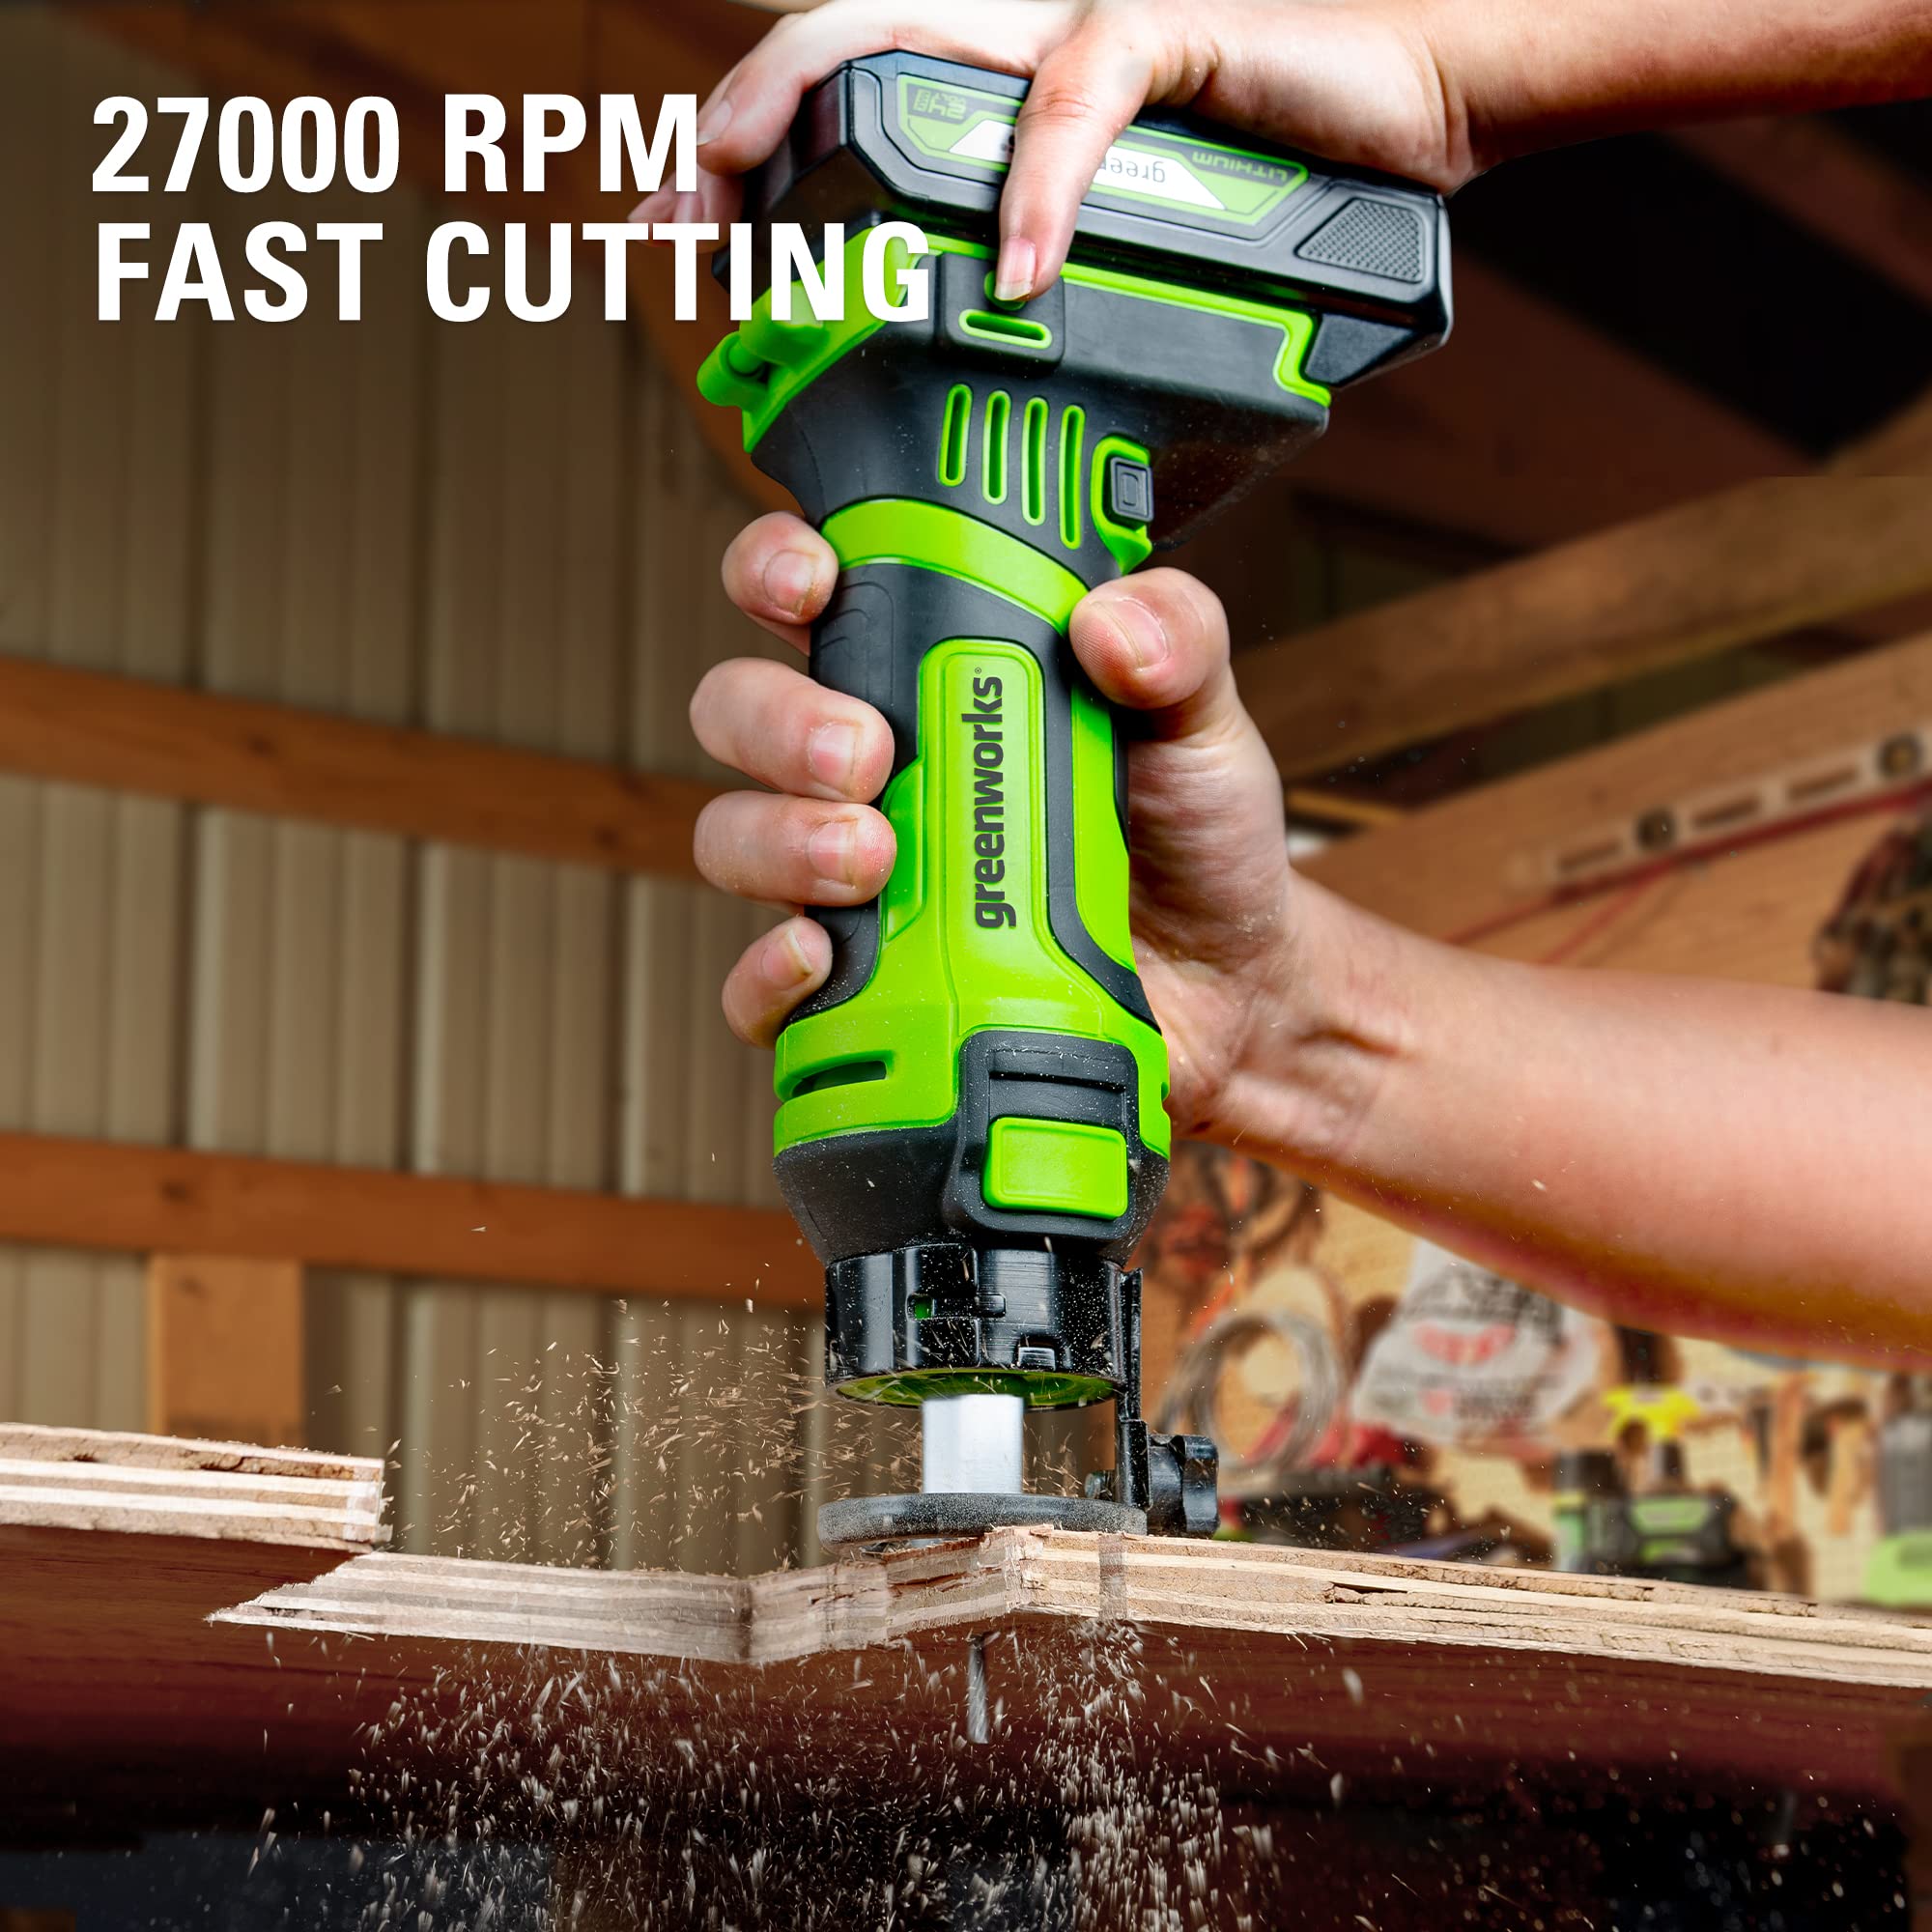 Greenworks 24v Speed Saw Rotary Cut Tool, 2Ah Battery and Charger Included - image 3 of 7